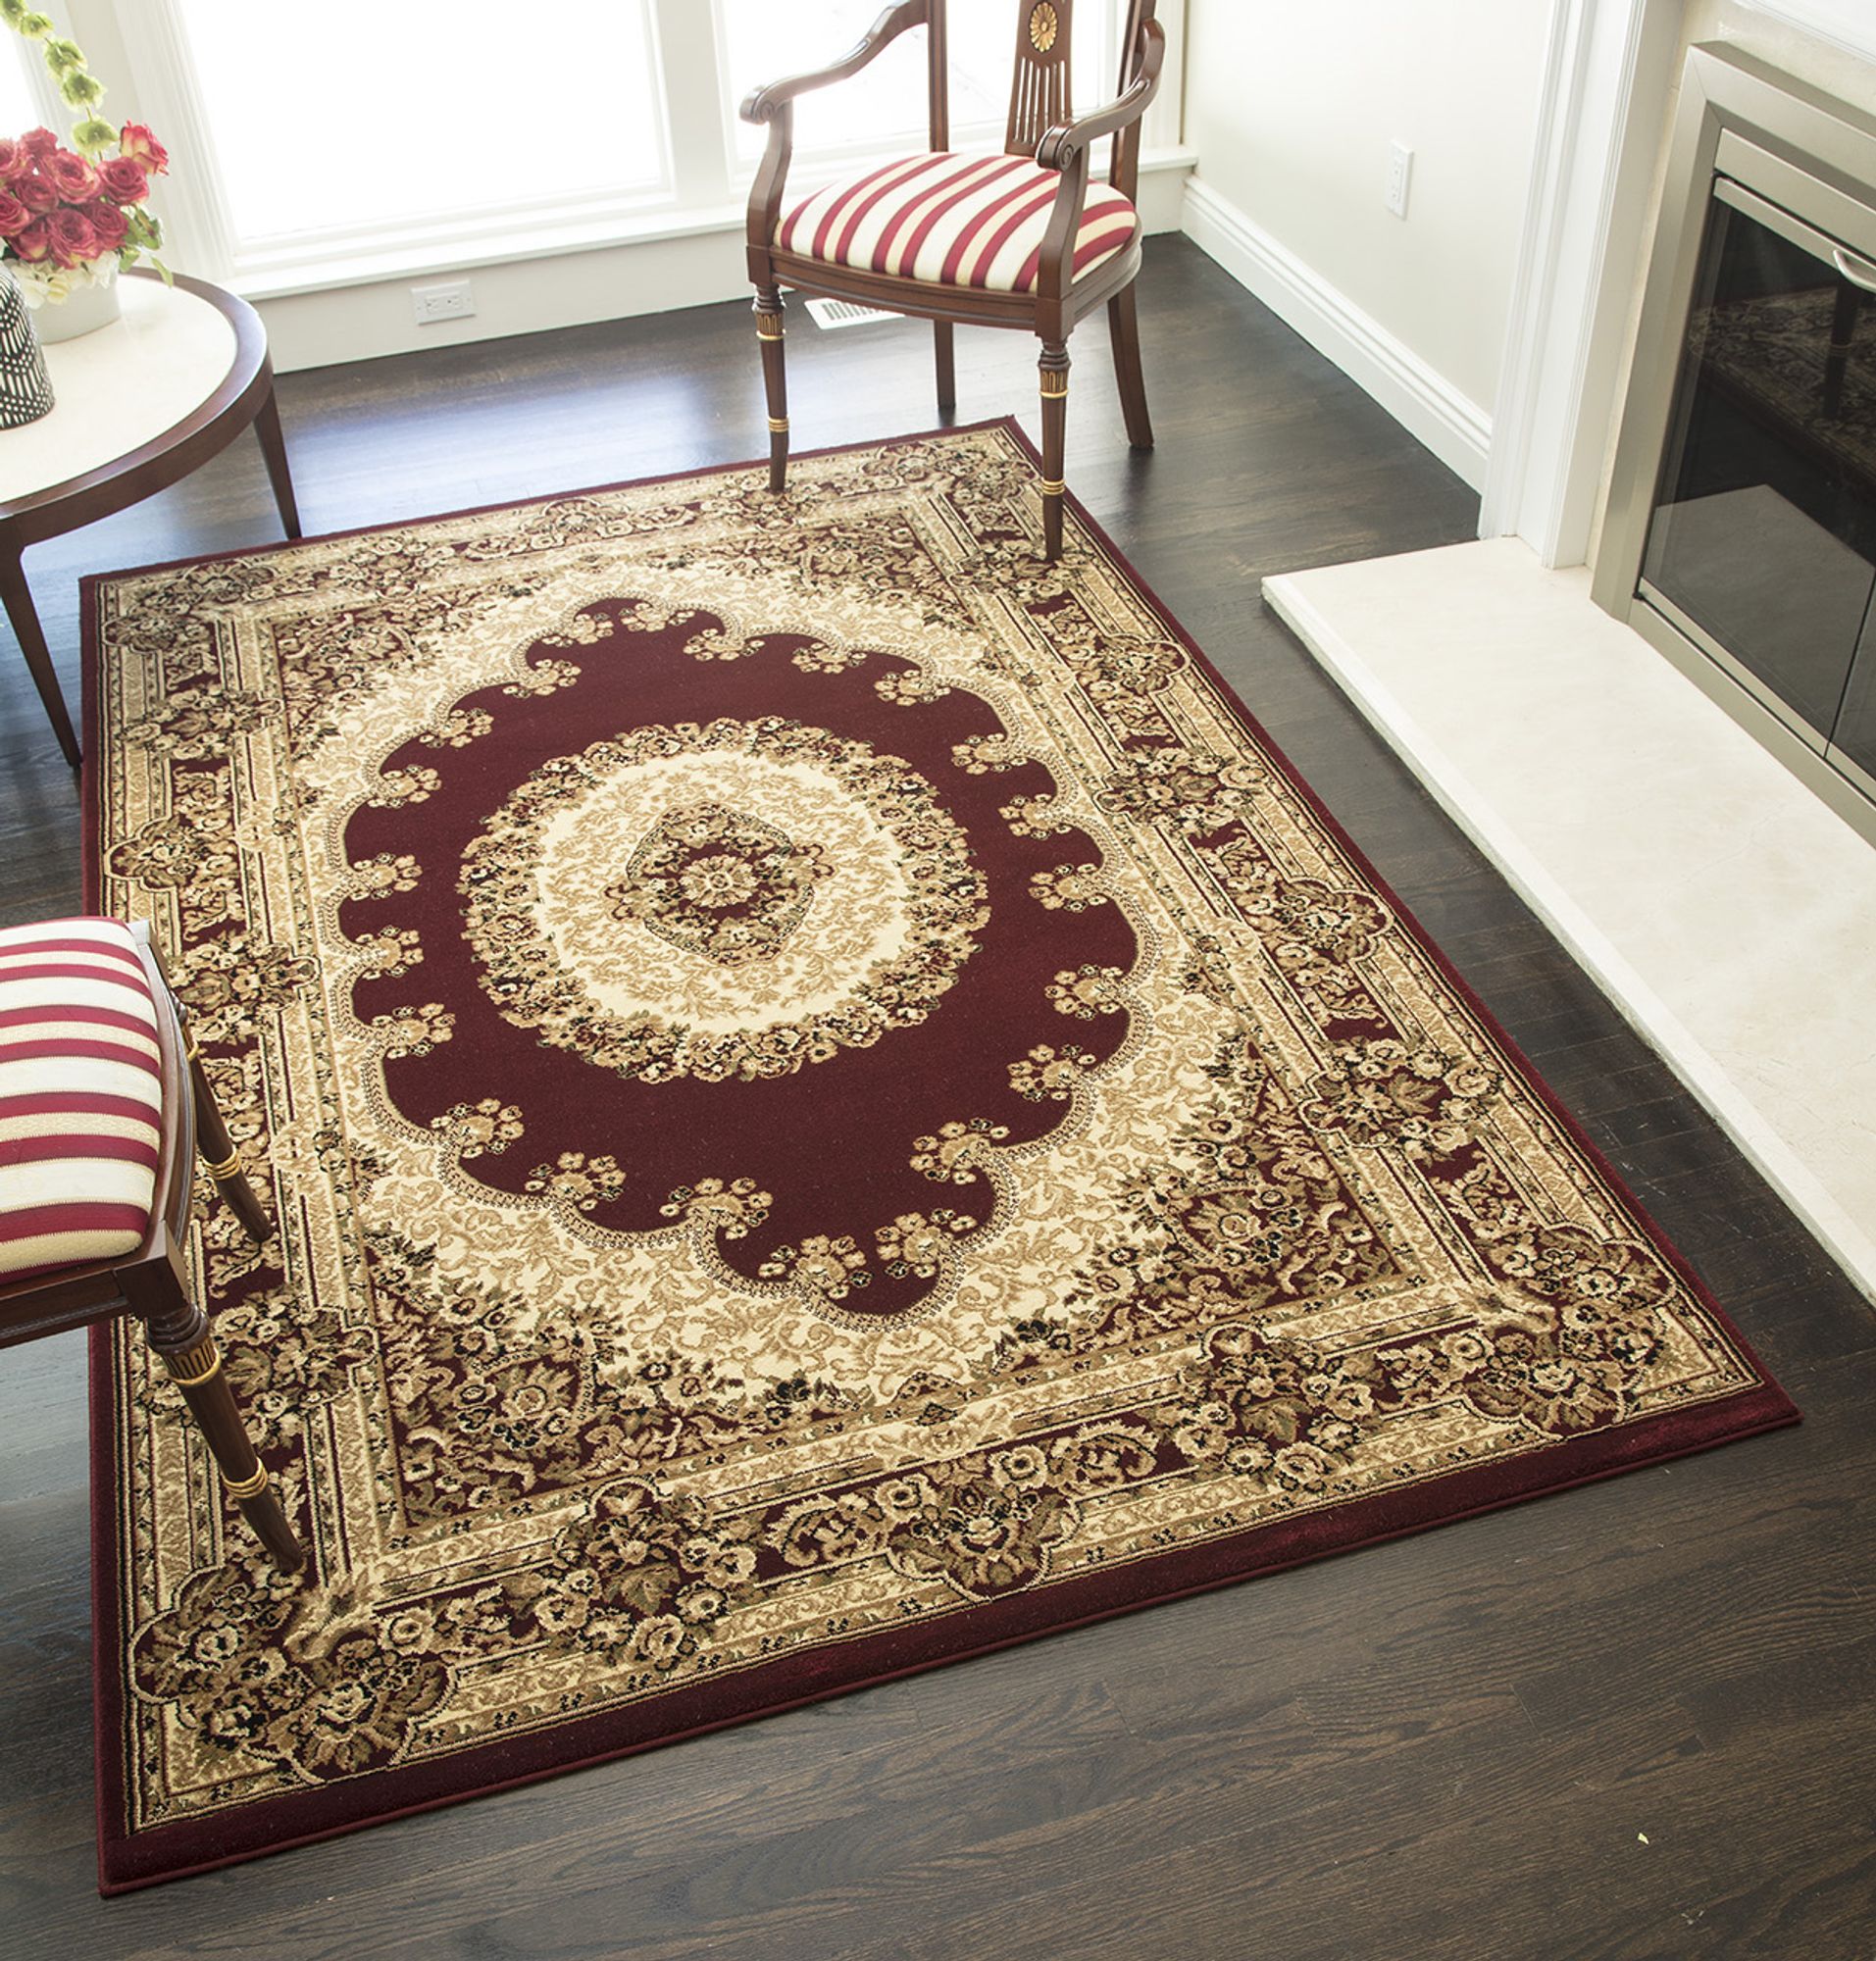 Rugs America Vista 807-RED Kerman Red Oriental Traditional Red Area Rug, 3'11"x5'3" - image 2 of 5